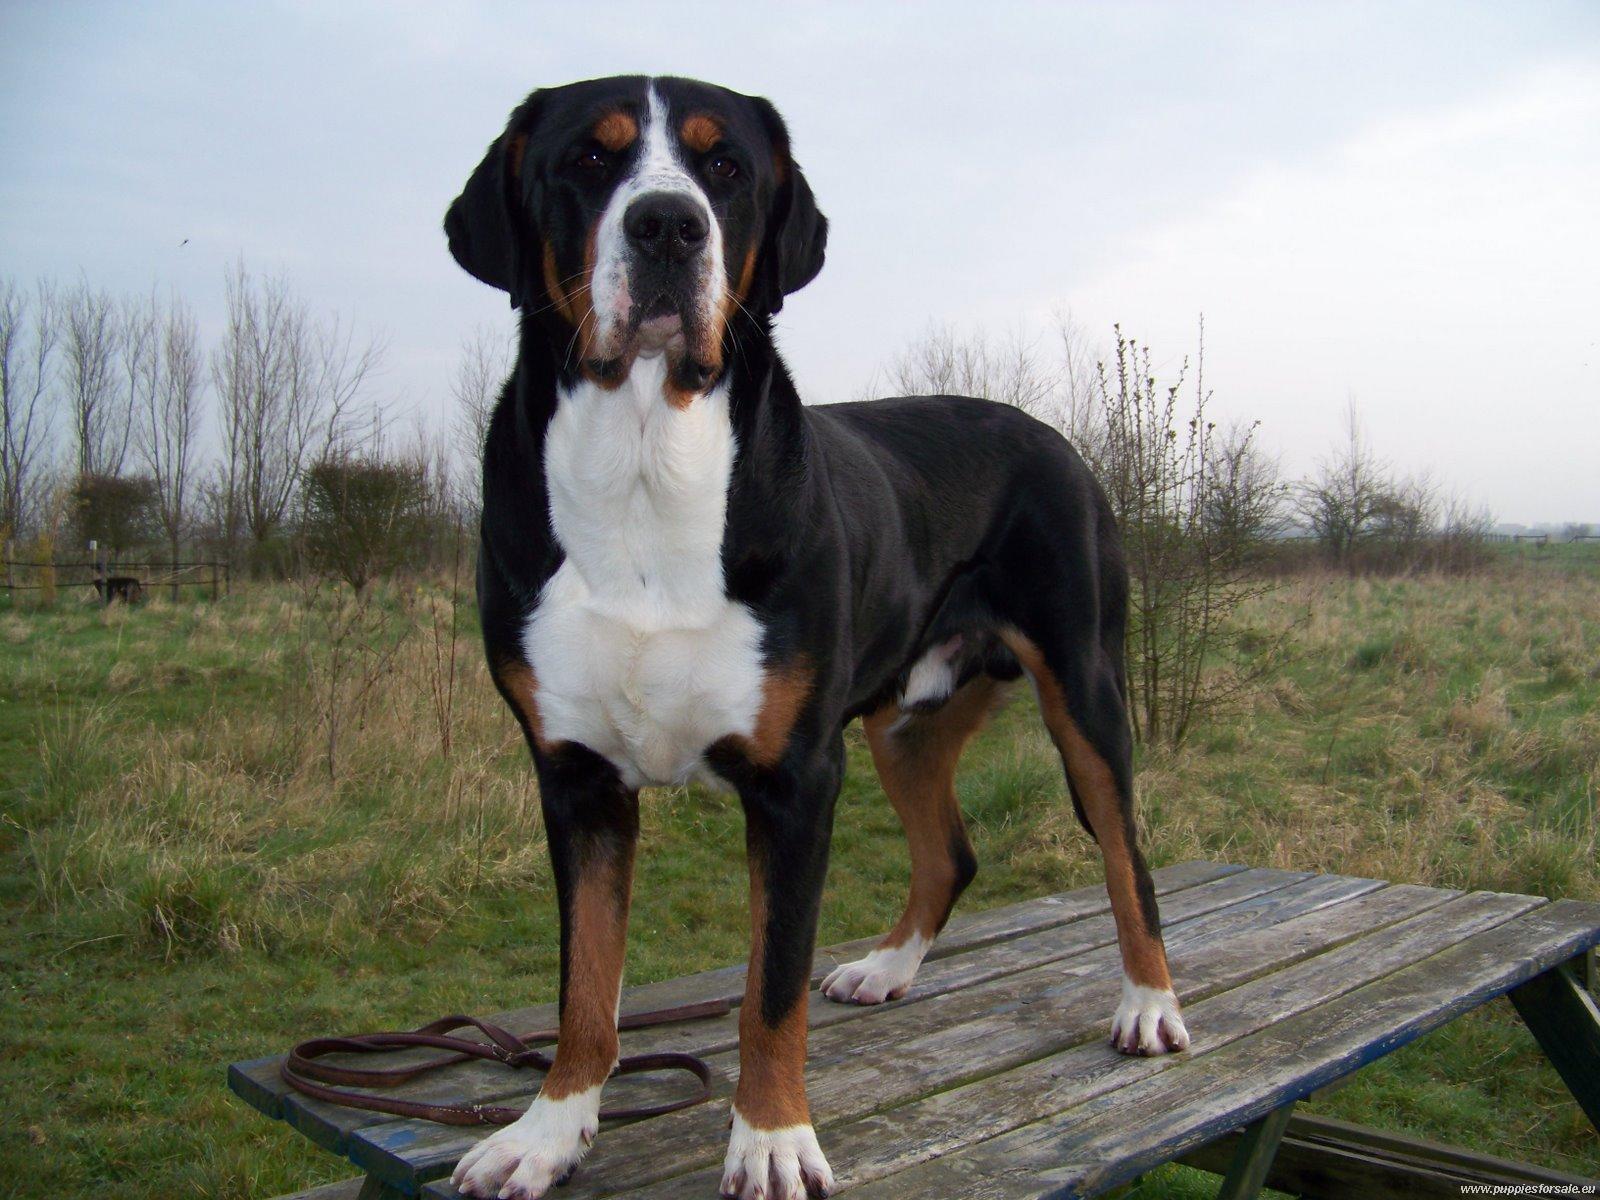 Greater Swiss Mountain Dog Breed Guide - Learn about the Greater Swiss